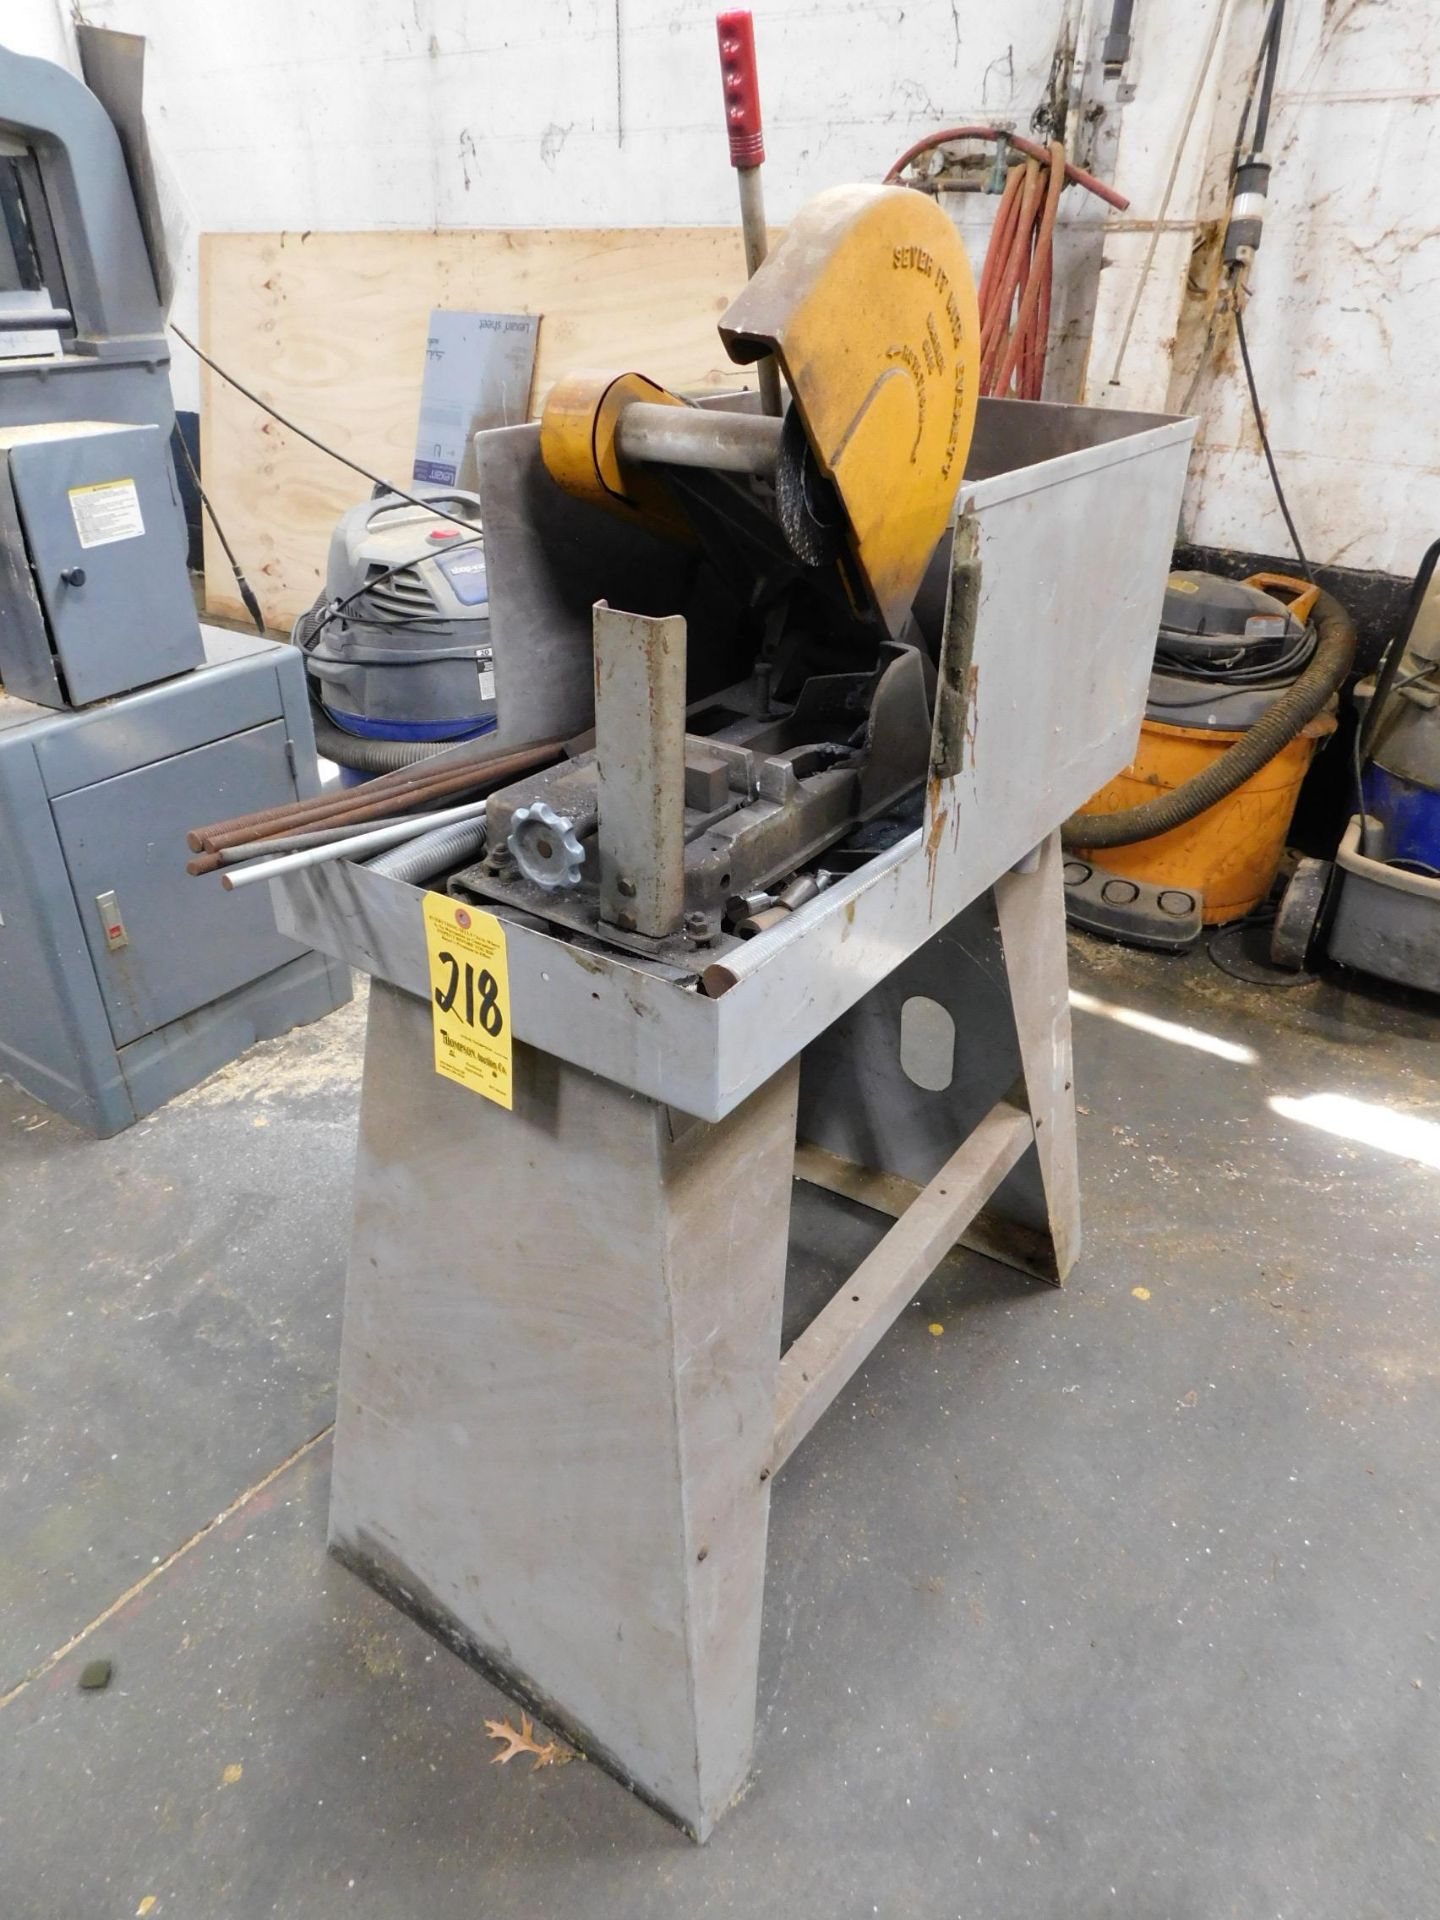 Everett 14" Abrasive Cut-Off Saw, with Stand